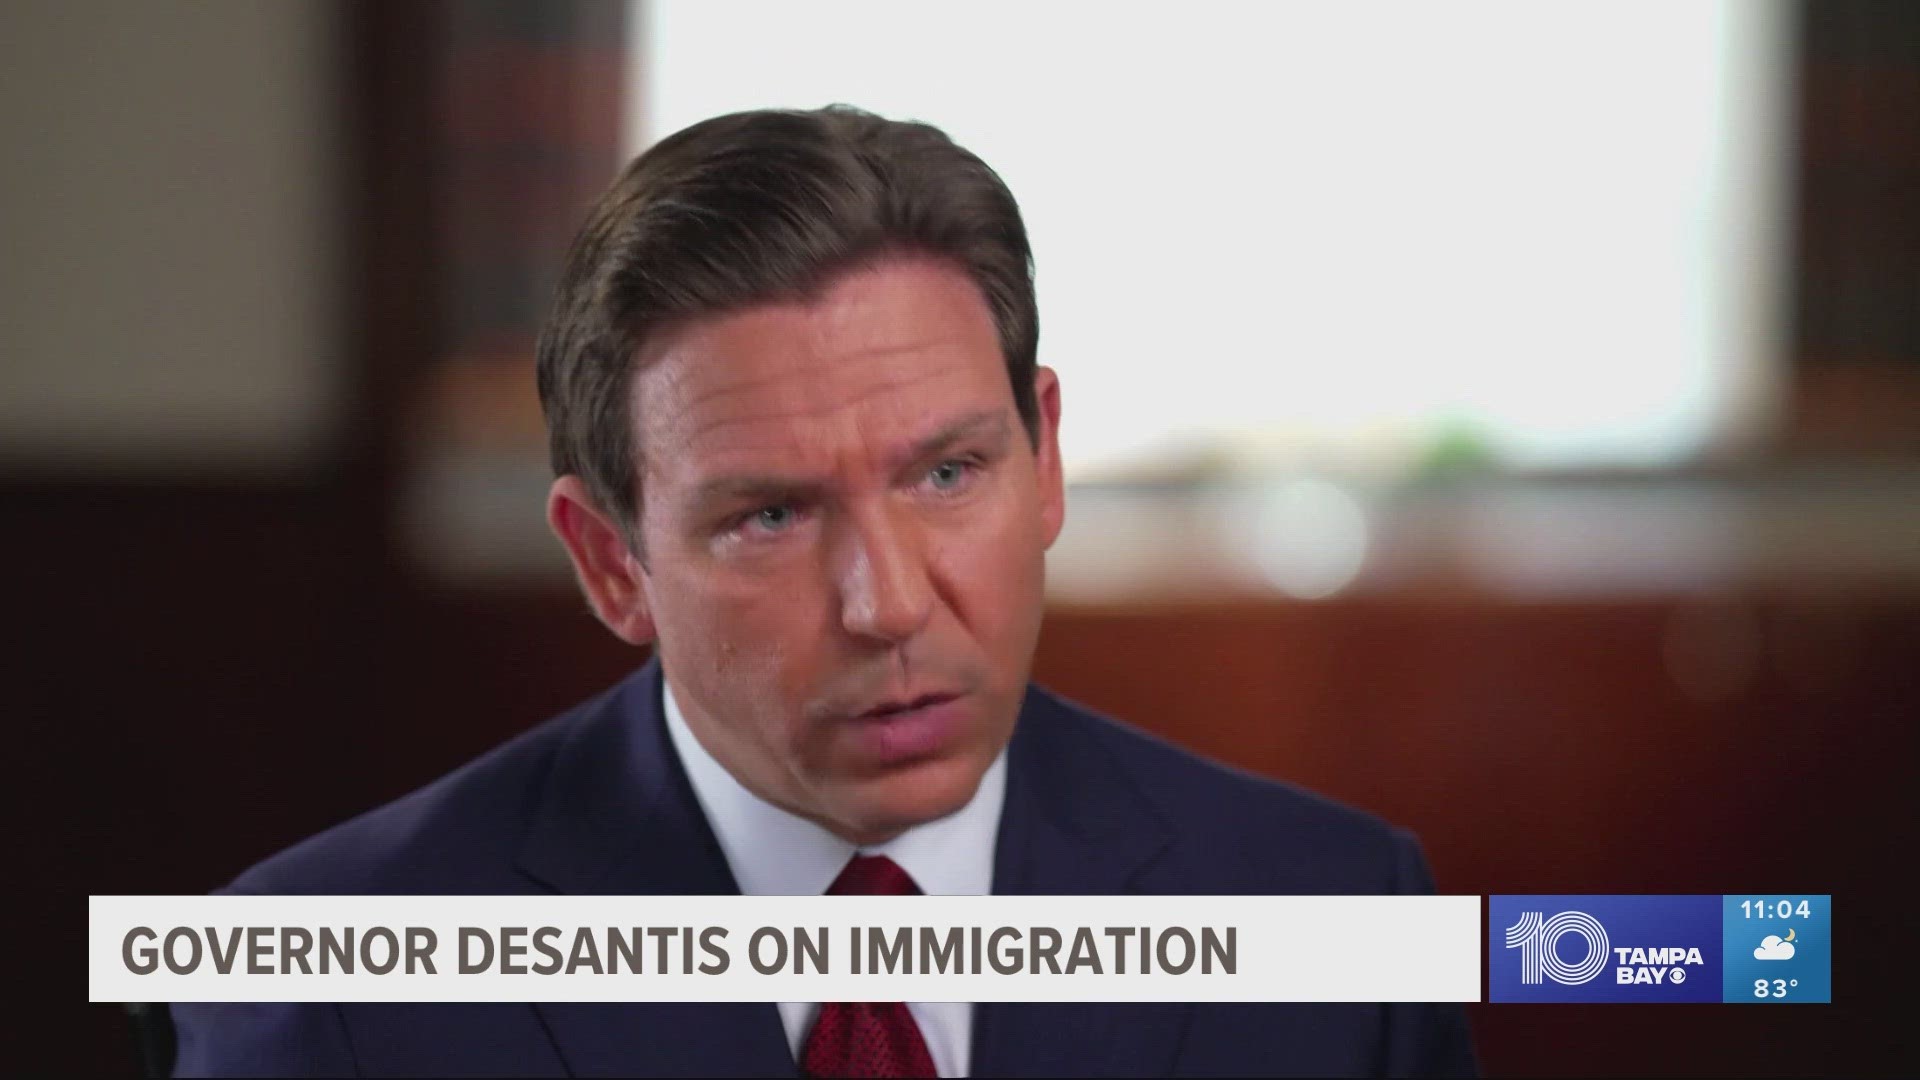 DeSantis attempted to clarify his vow to leave people crossing illegally "stone cold dead" during an interview on the "CBS Evening News."